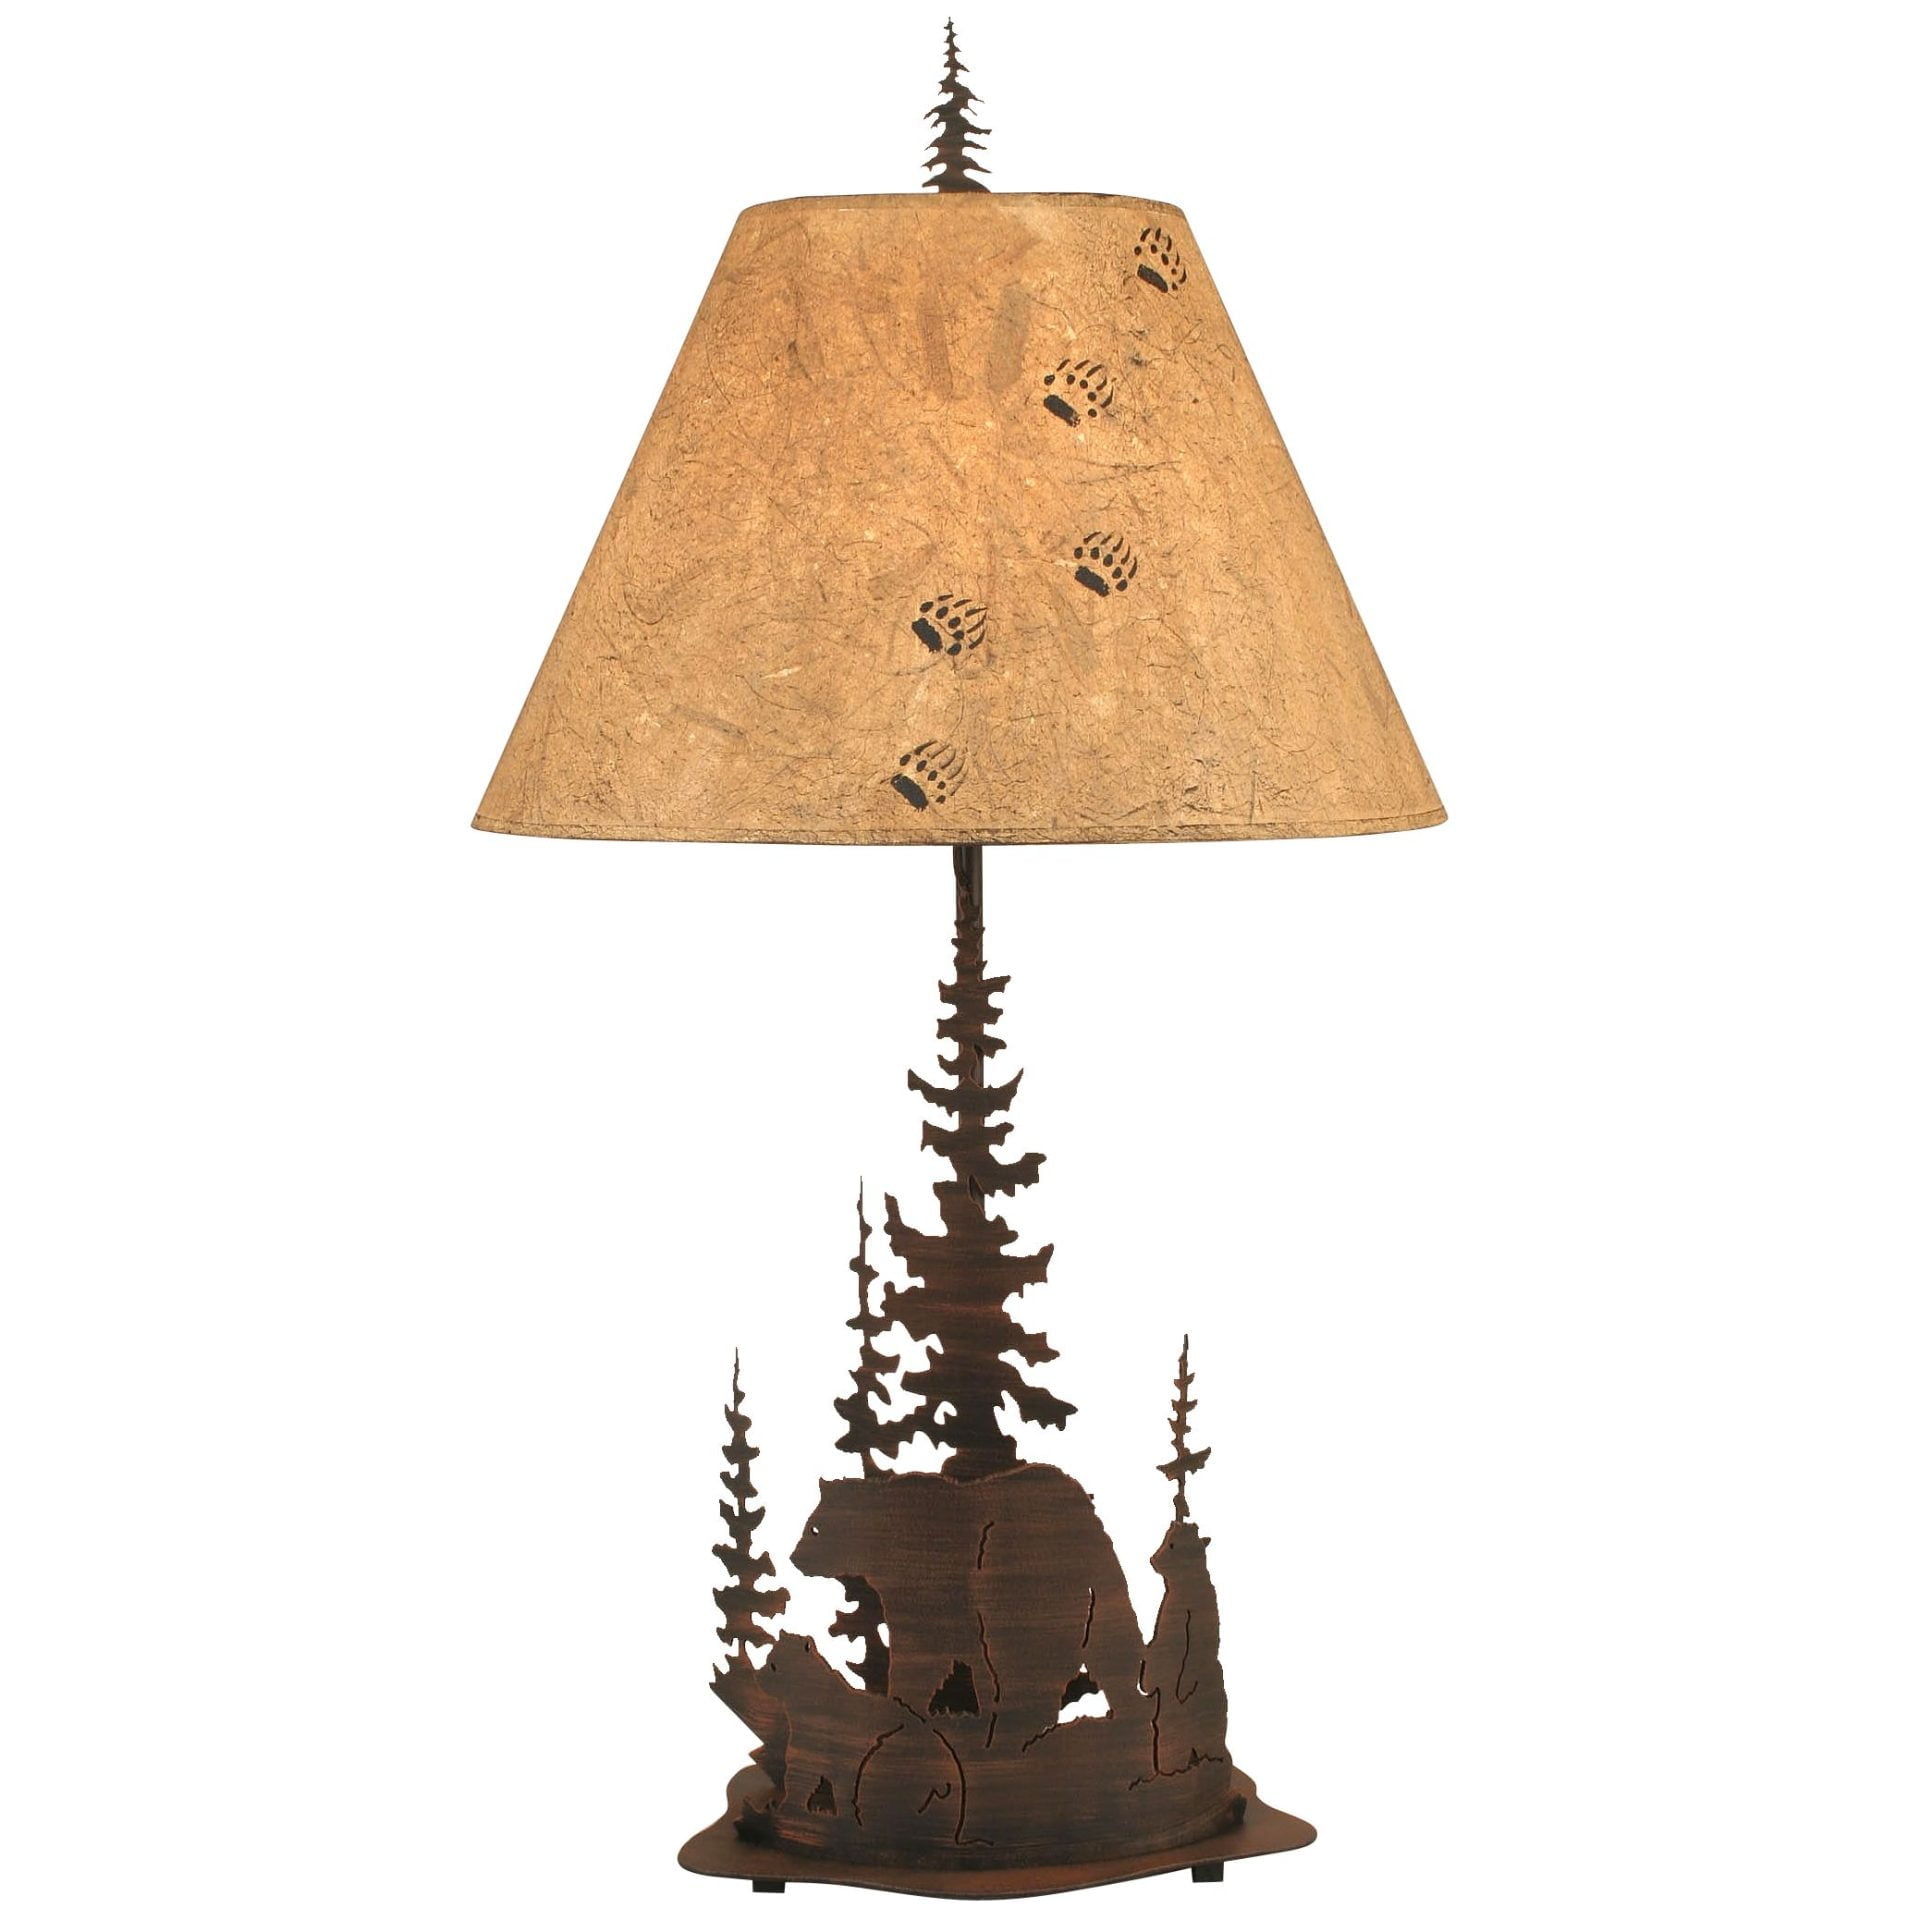 Rustic Nature Scene Table Lamp with Forest